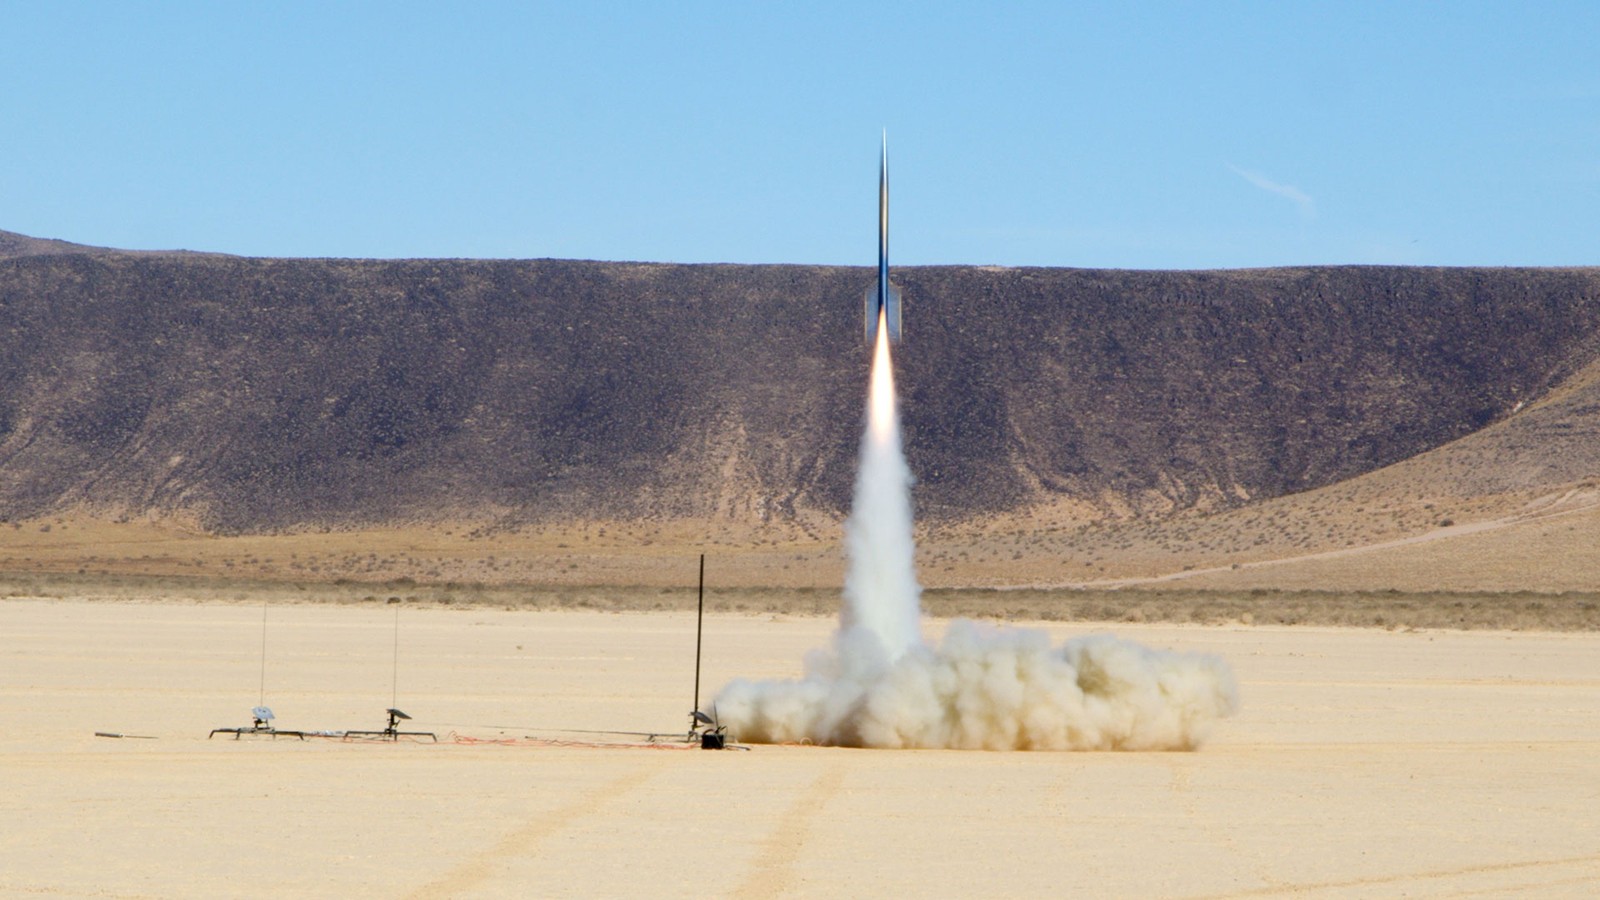 A small rocket is shot into the air.